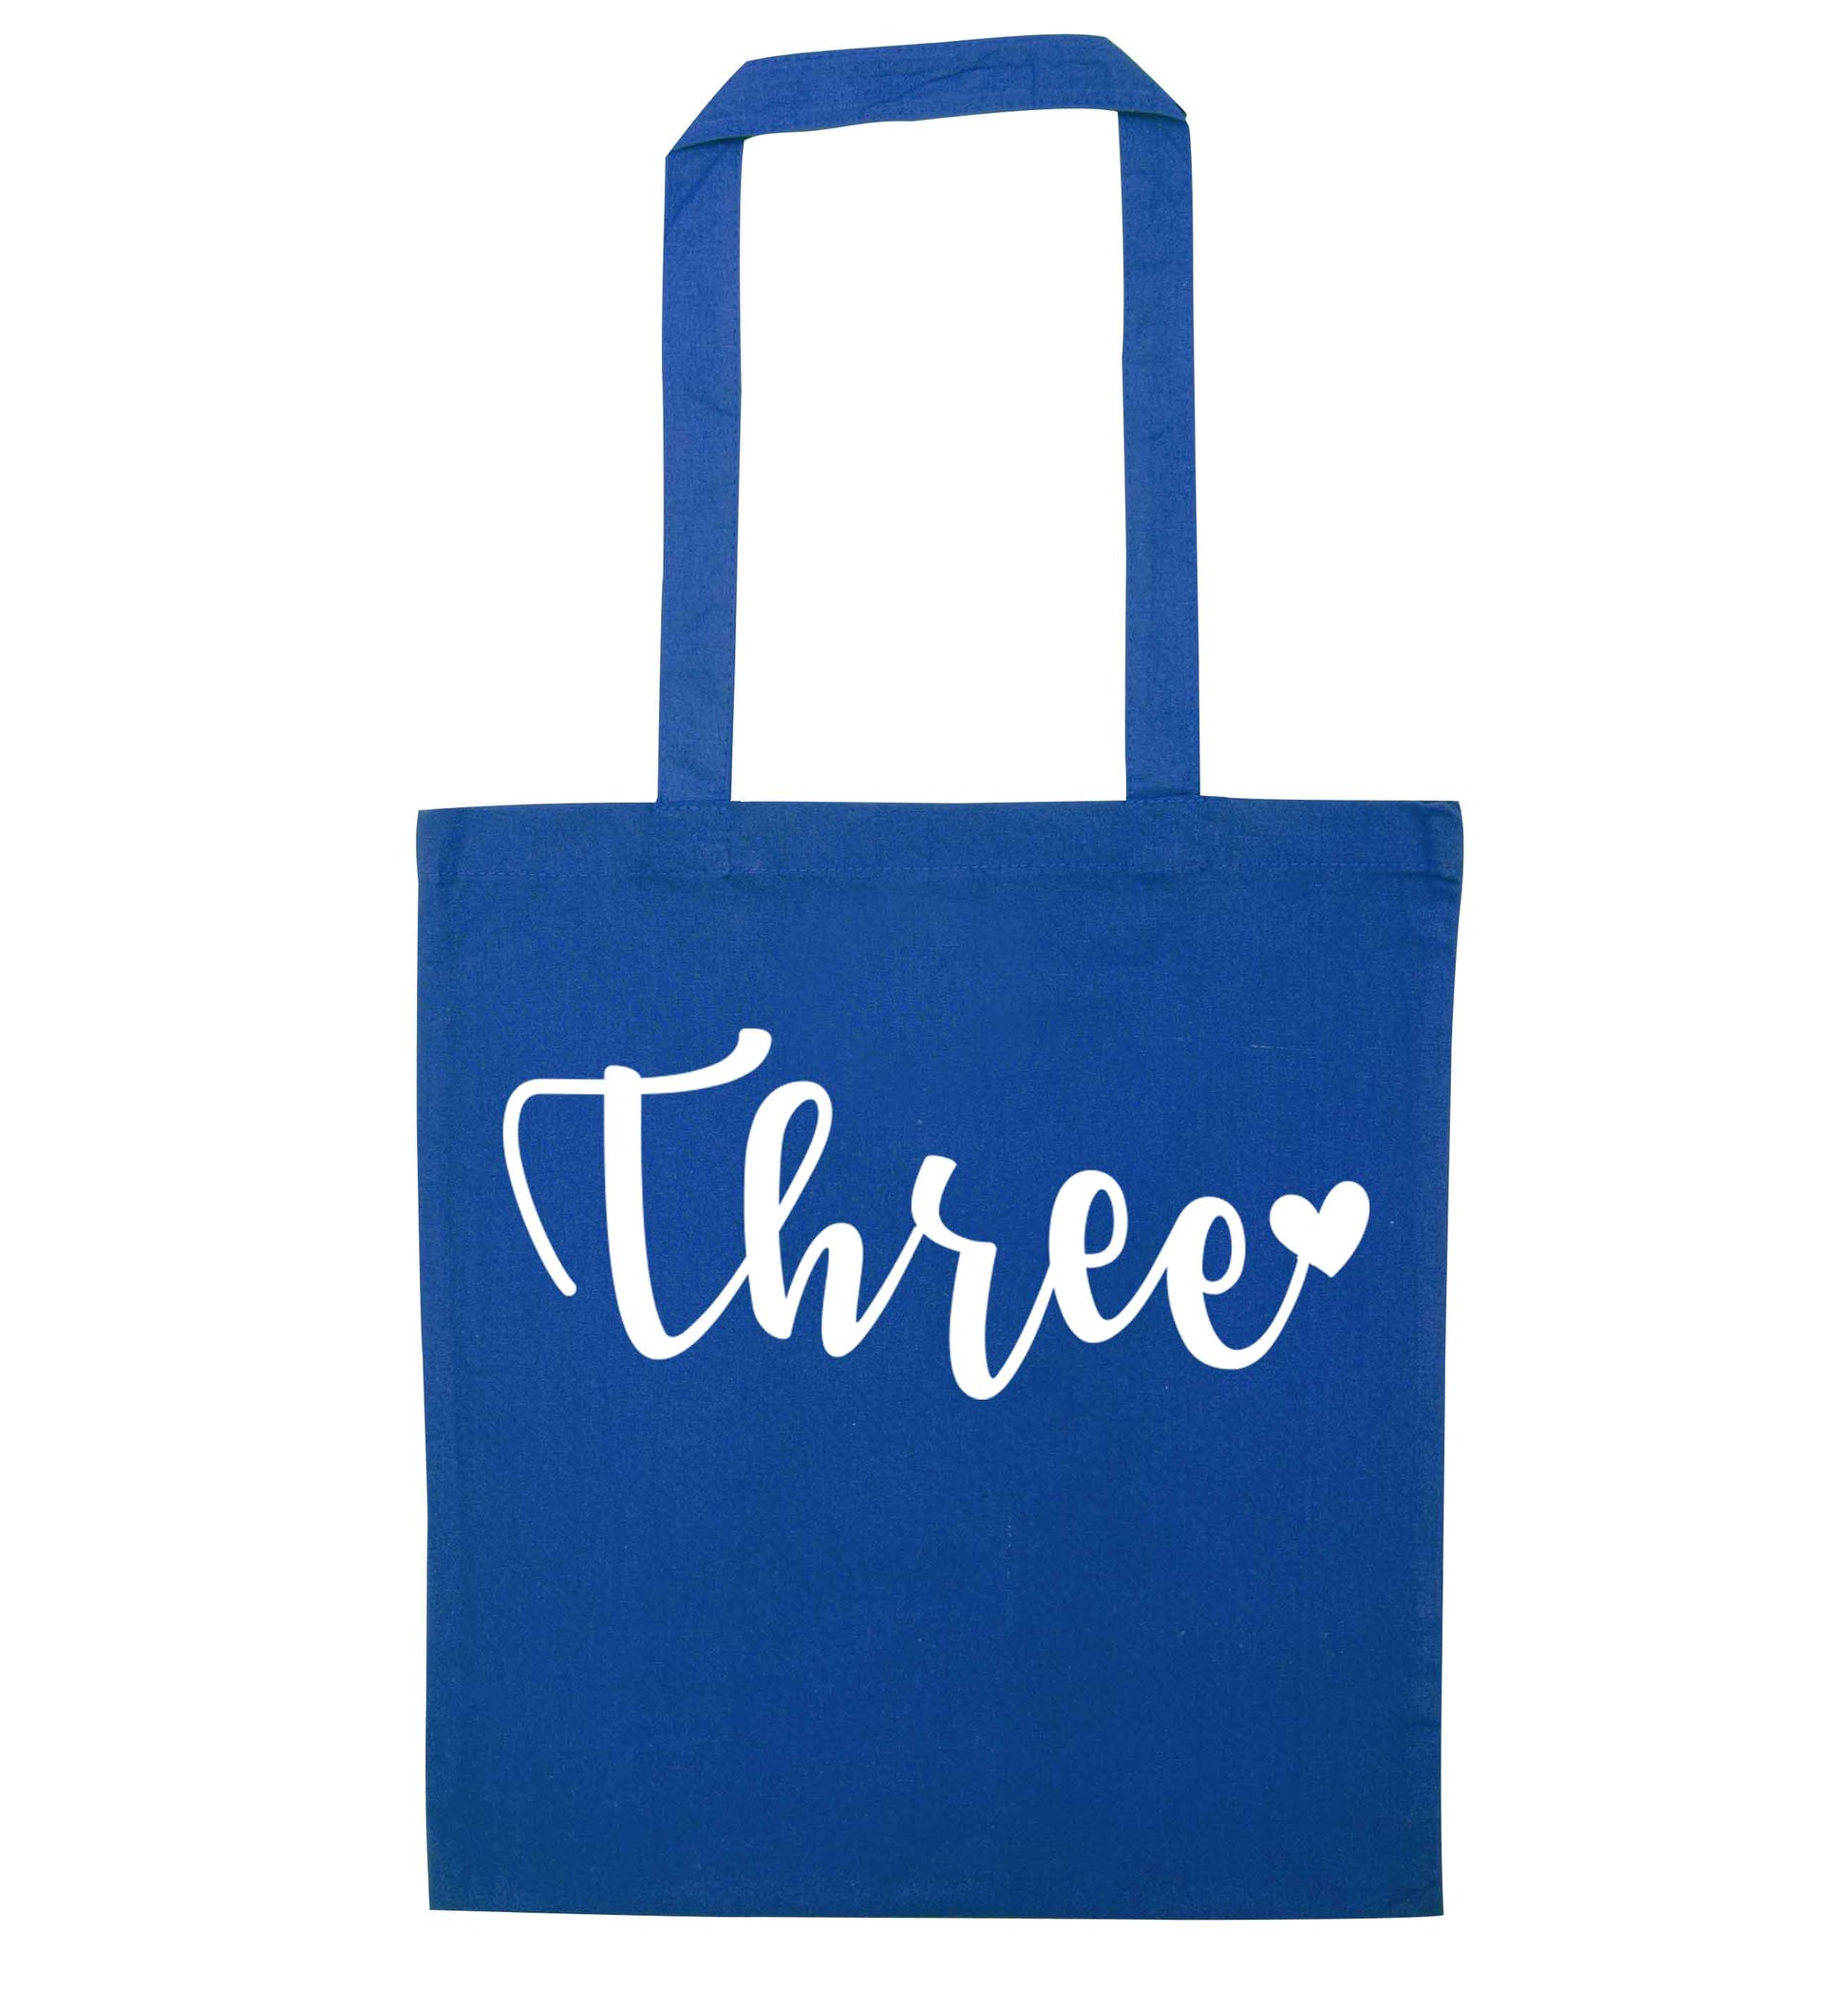 Two and Heart blue tote bag